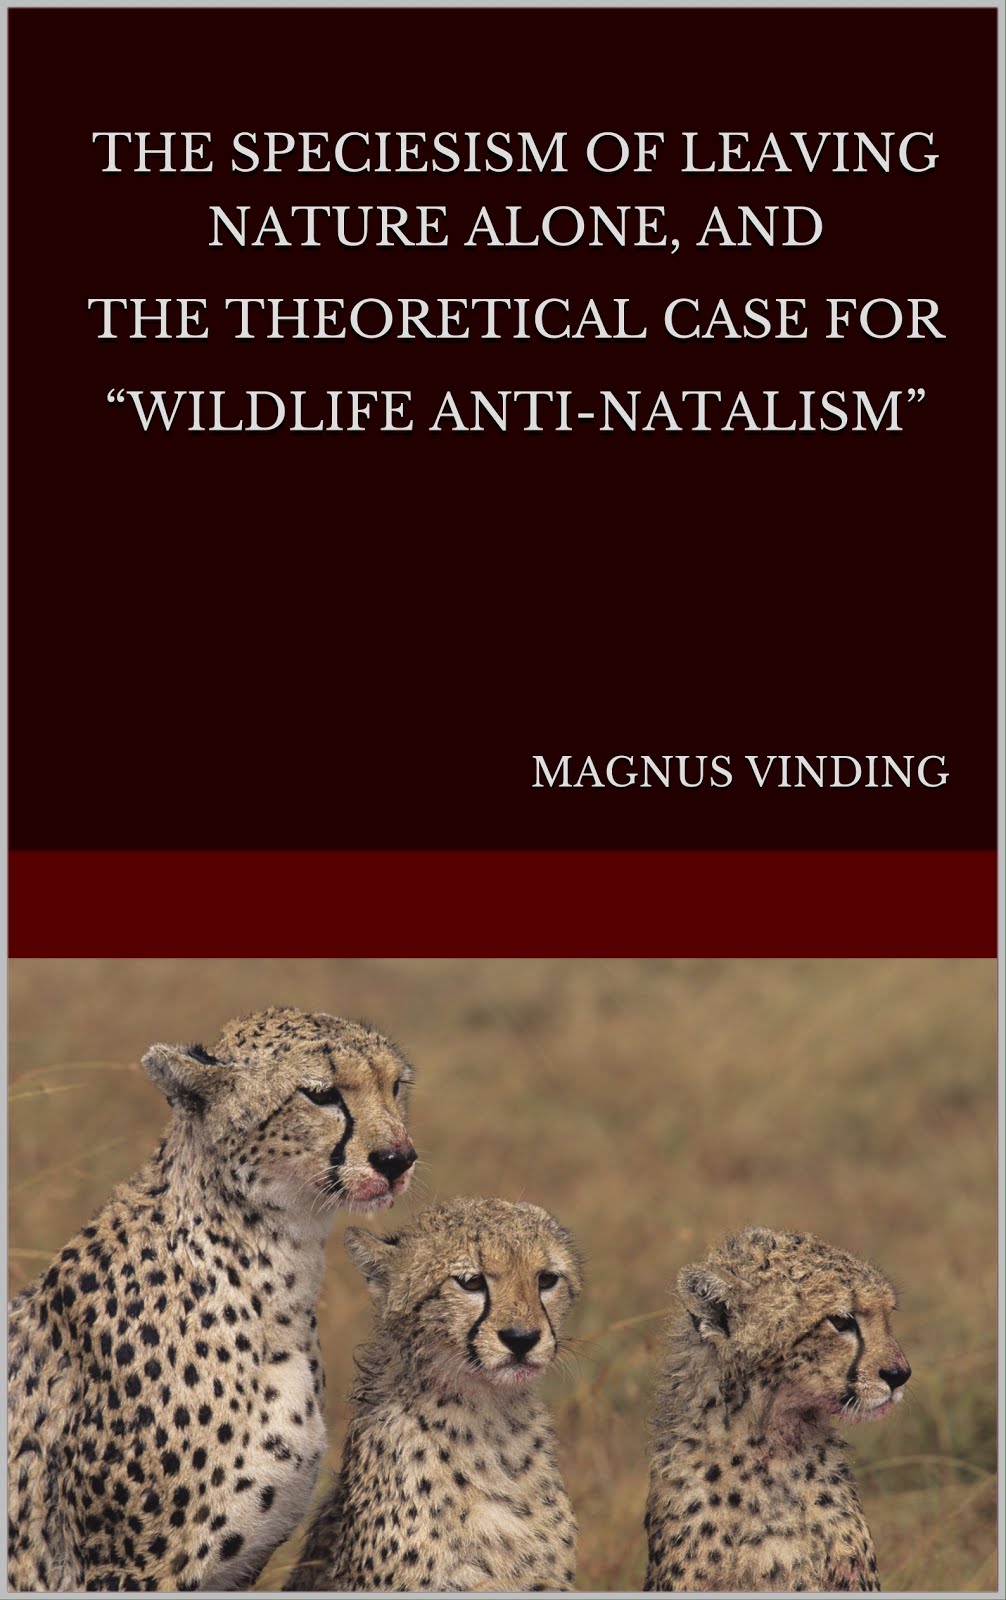 The Speciesism of Leaving Nature Alone, and the Theoretical Case for “Wildlife Anti-Natalism”